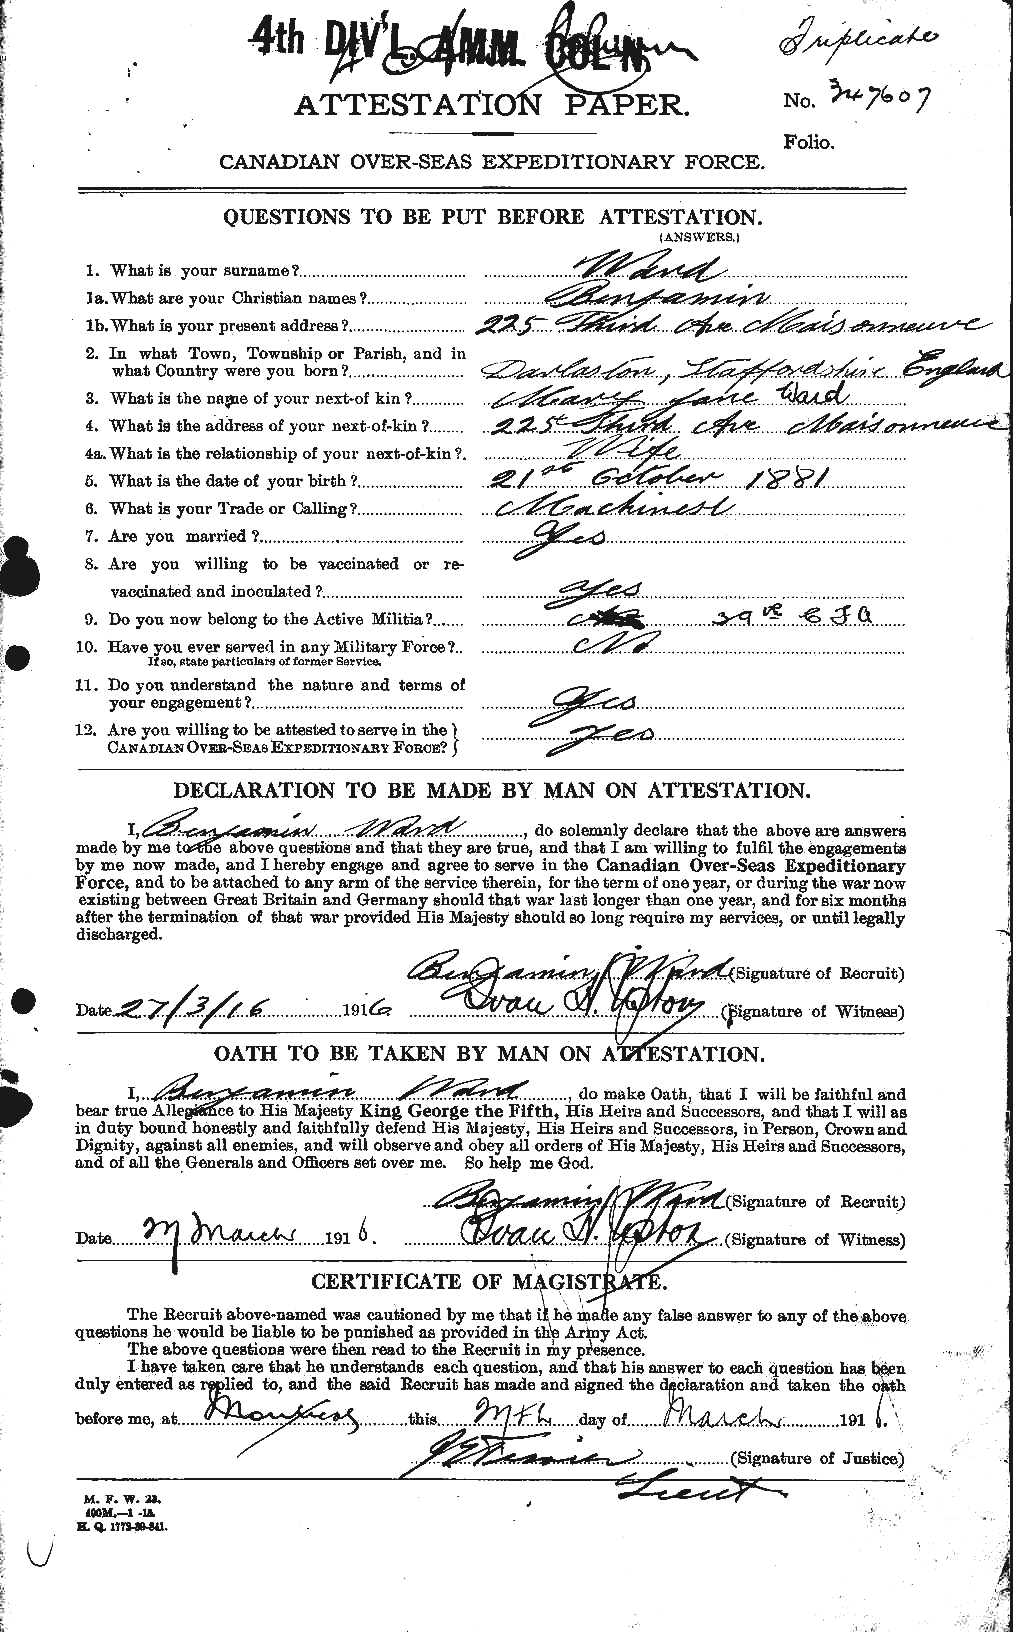 Personnel Records of the First World War - CEF 655163a